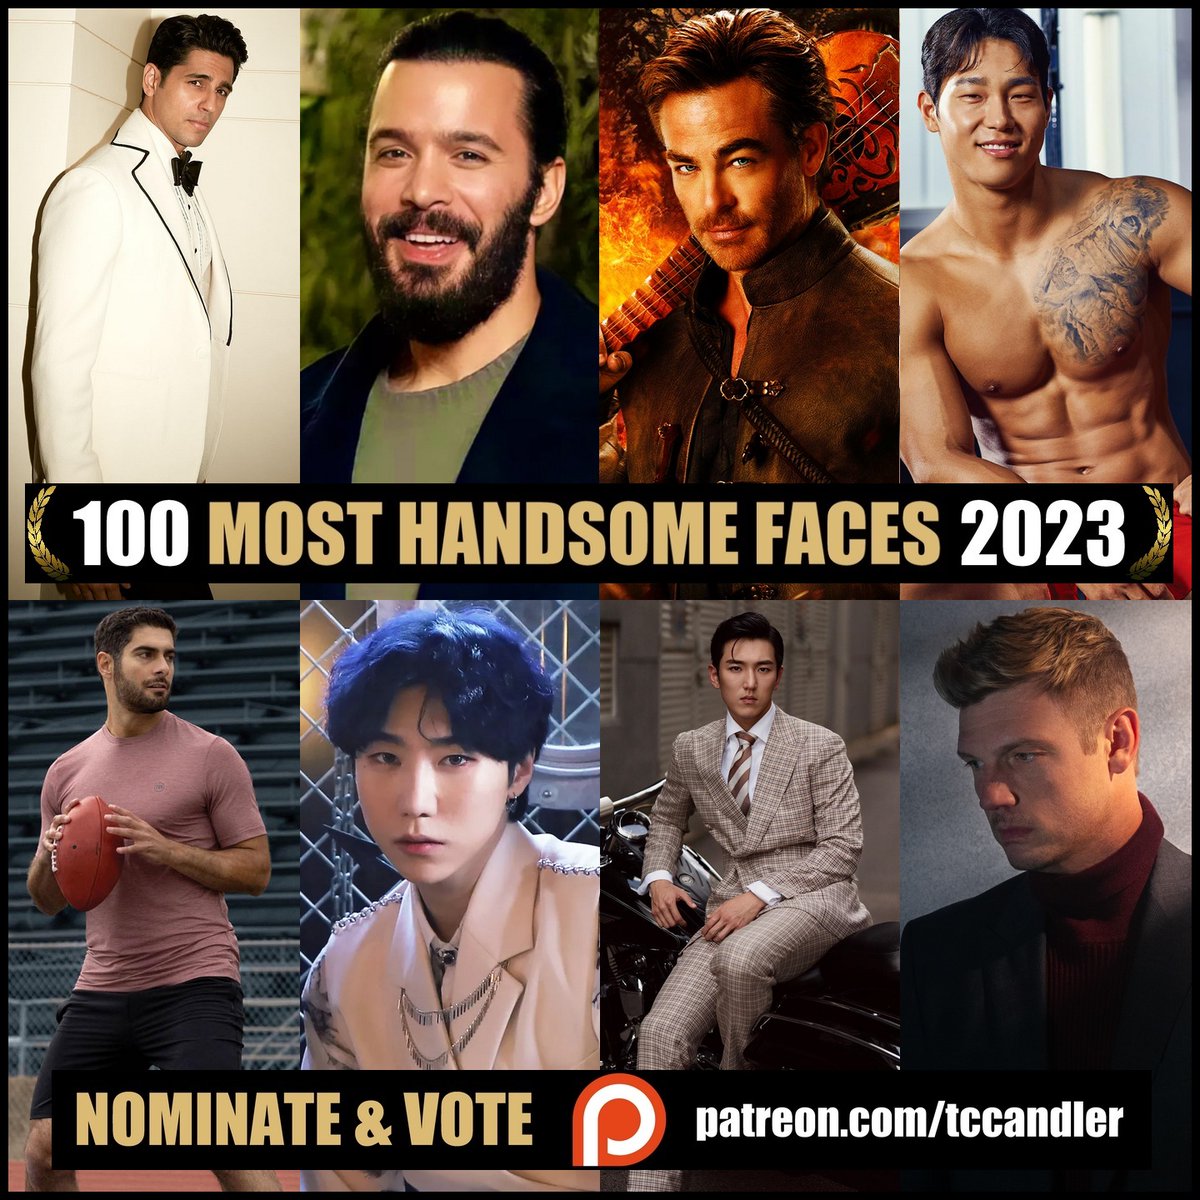 Nominations for The 100 Most Handsome Faces of 2023. Congratulations to all! If you would like to nominate & vote, please join our Patreon (Link in Bio). #TCCandler #100faces2023 #sidharthmalhotra #barisarduc #ChrisPine #yunsungbin #jimmygaroppolo #woojung #dios #zhaisiming